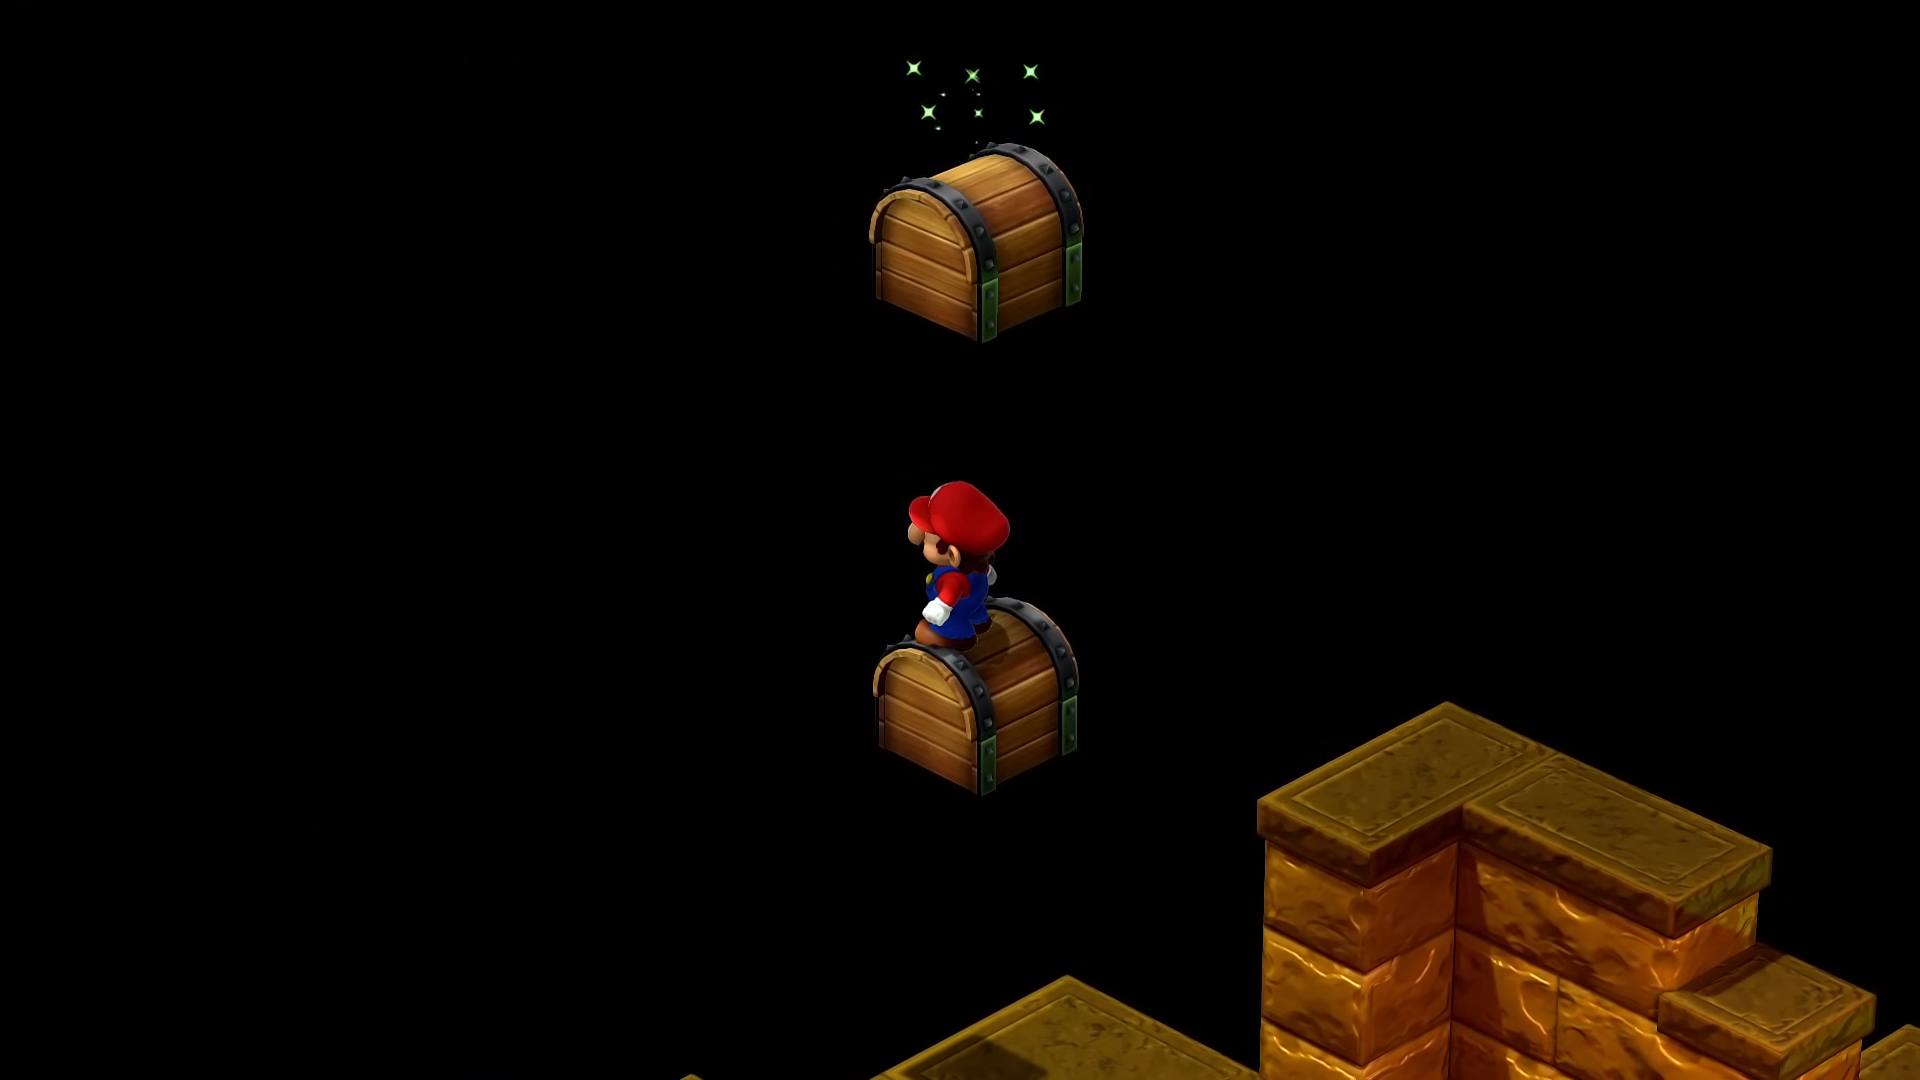 Mario standing on a floating chest.